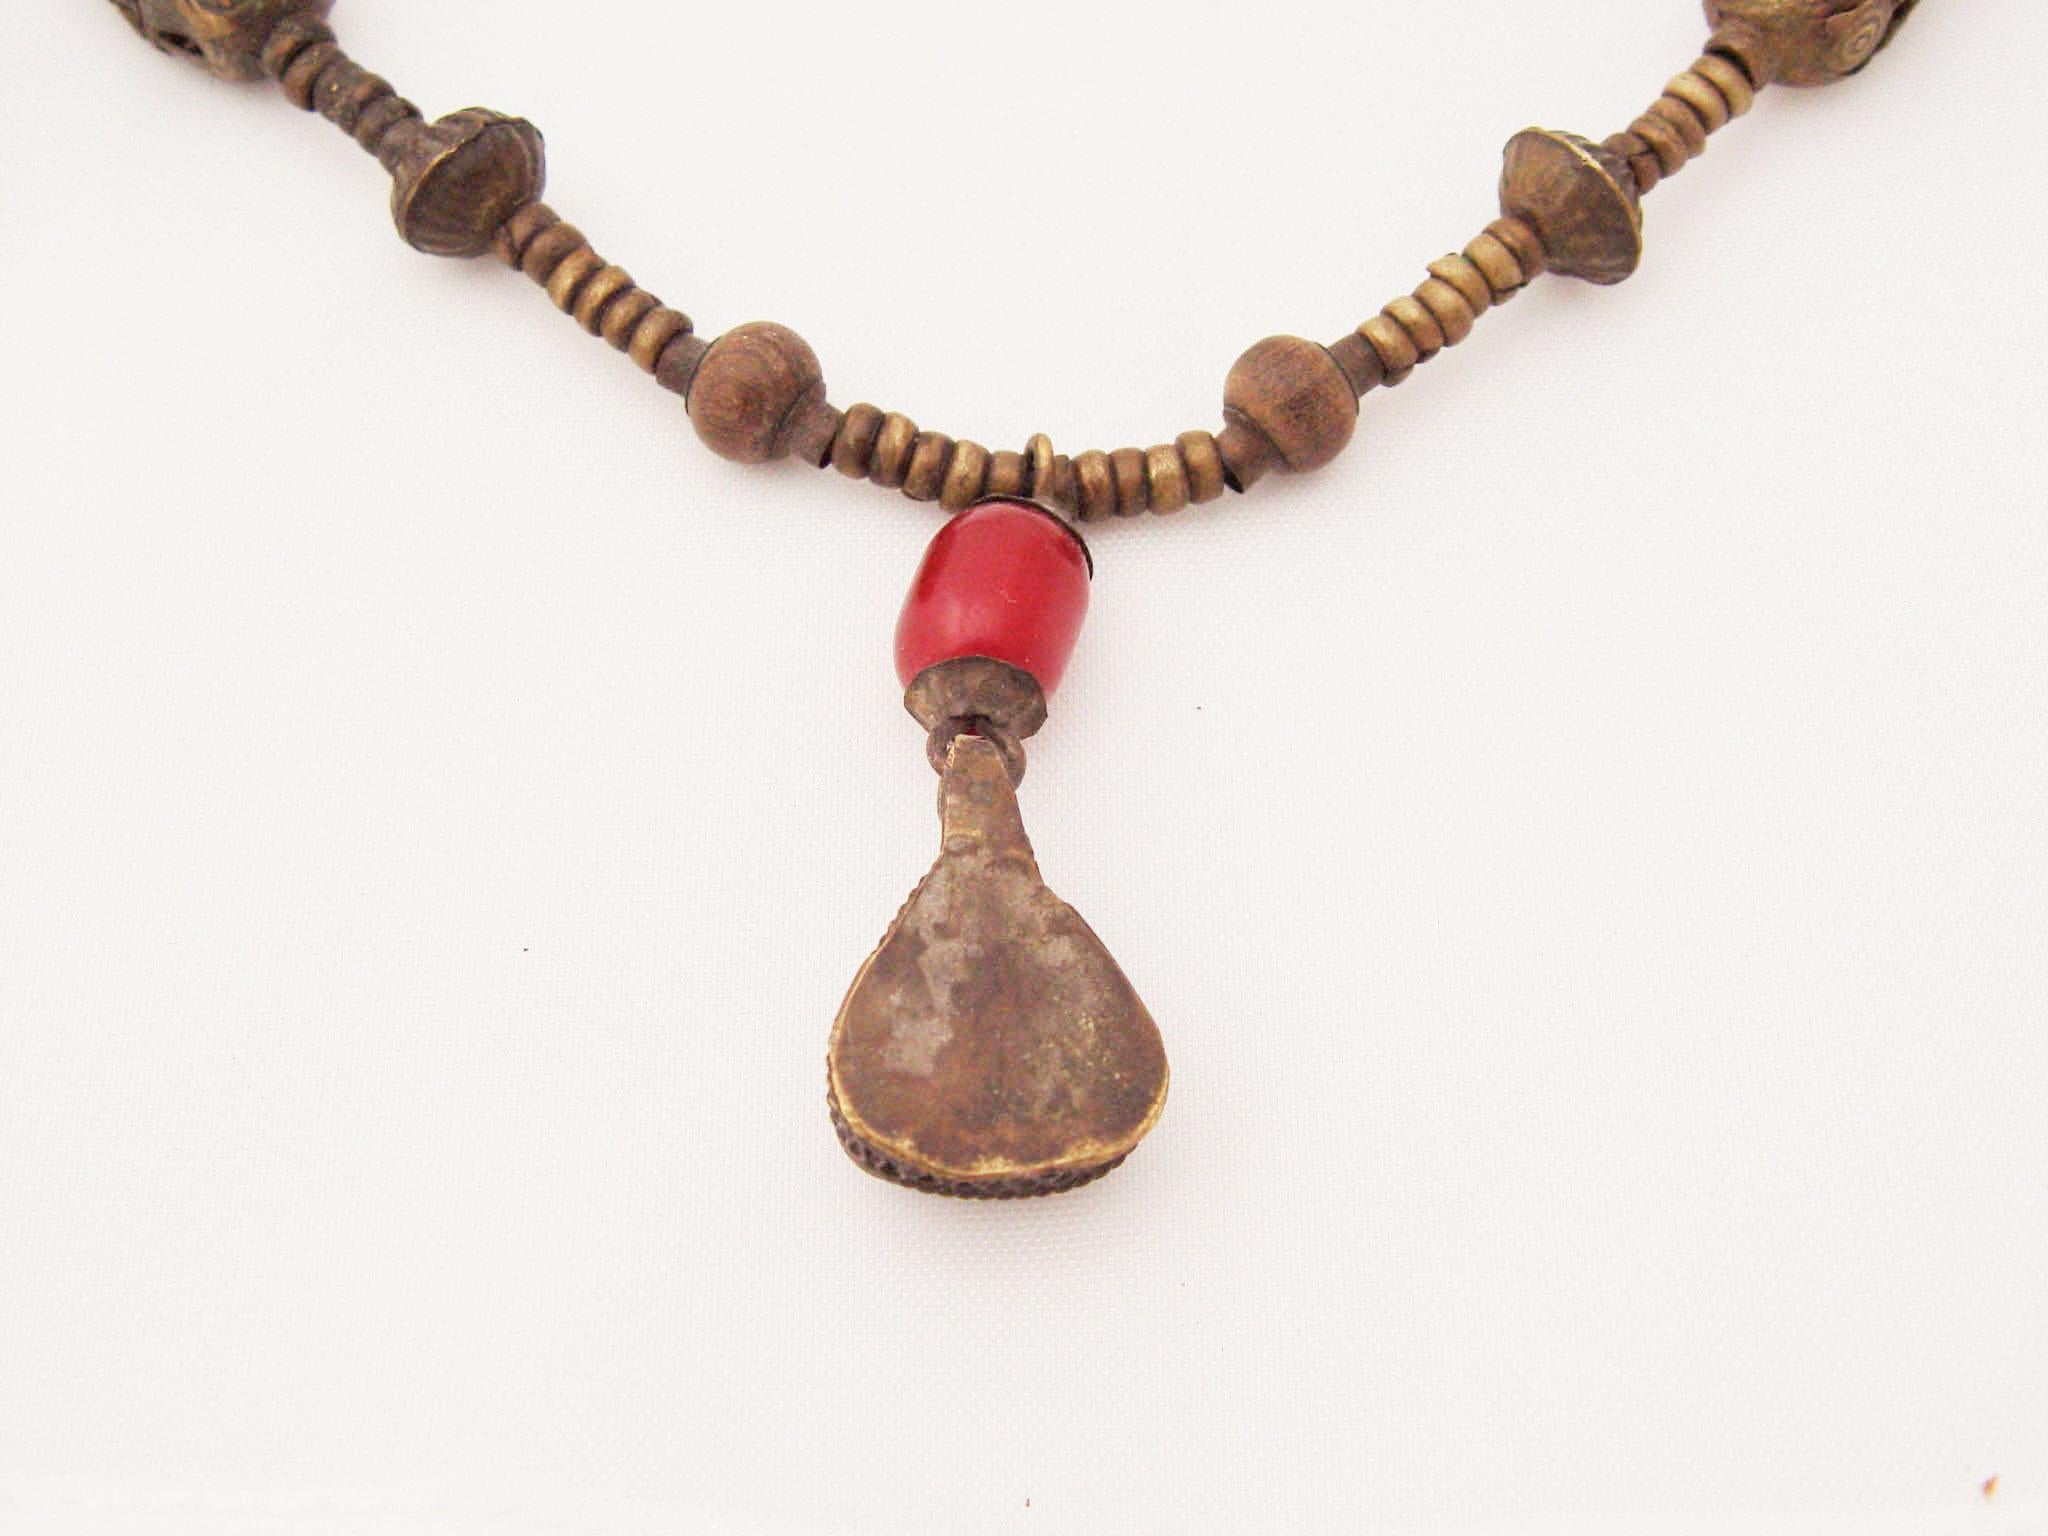 Vintage Tribal Lapis & Carnelian Necklace In Fair Condition For Sale In Seguin, TX